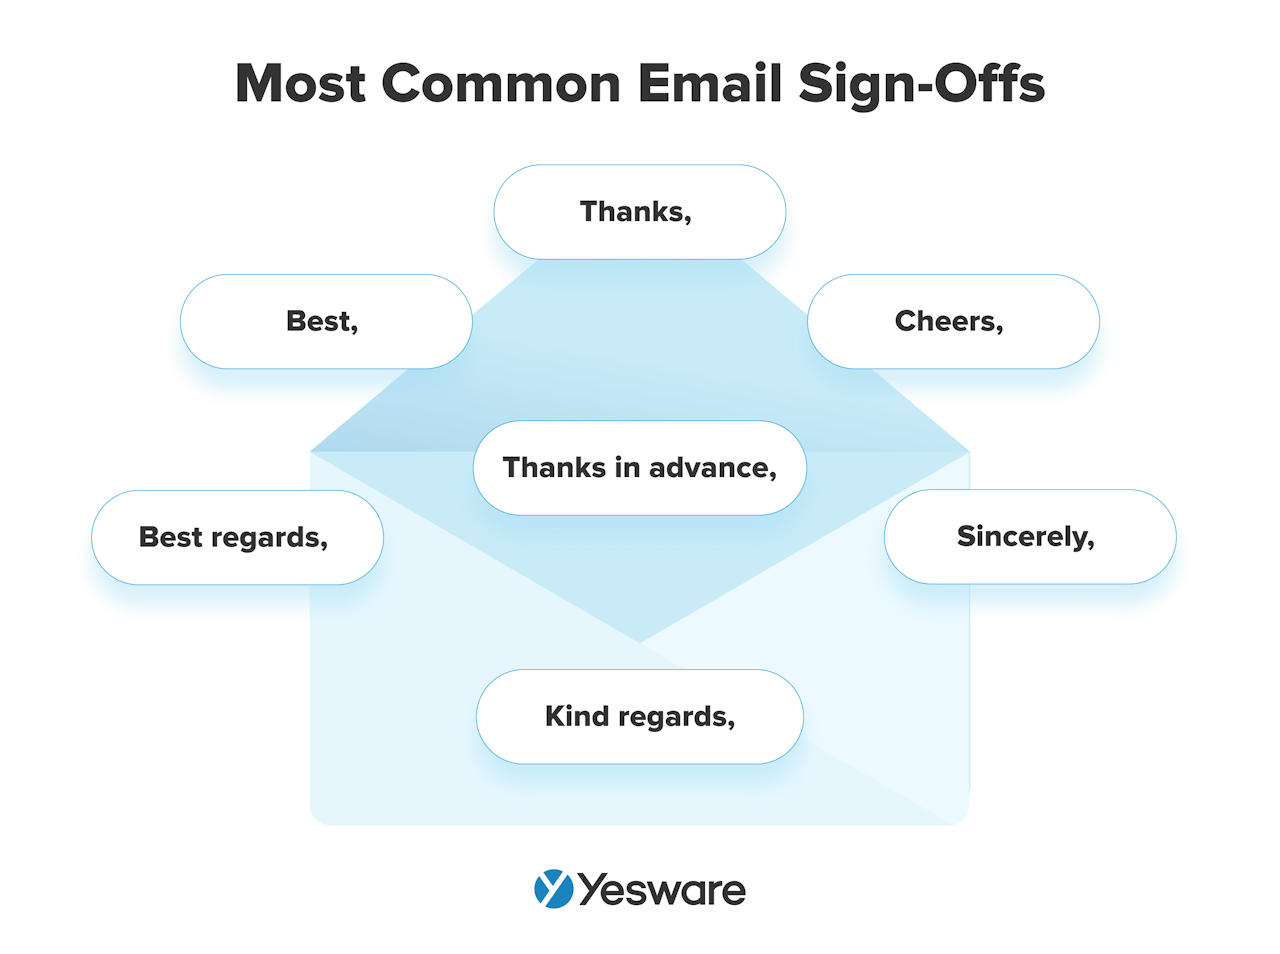 how to end an email: common email sign-offs